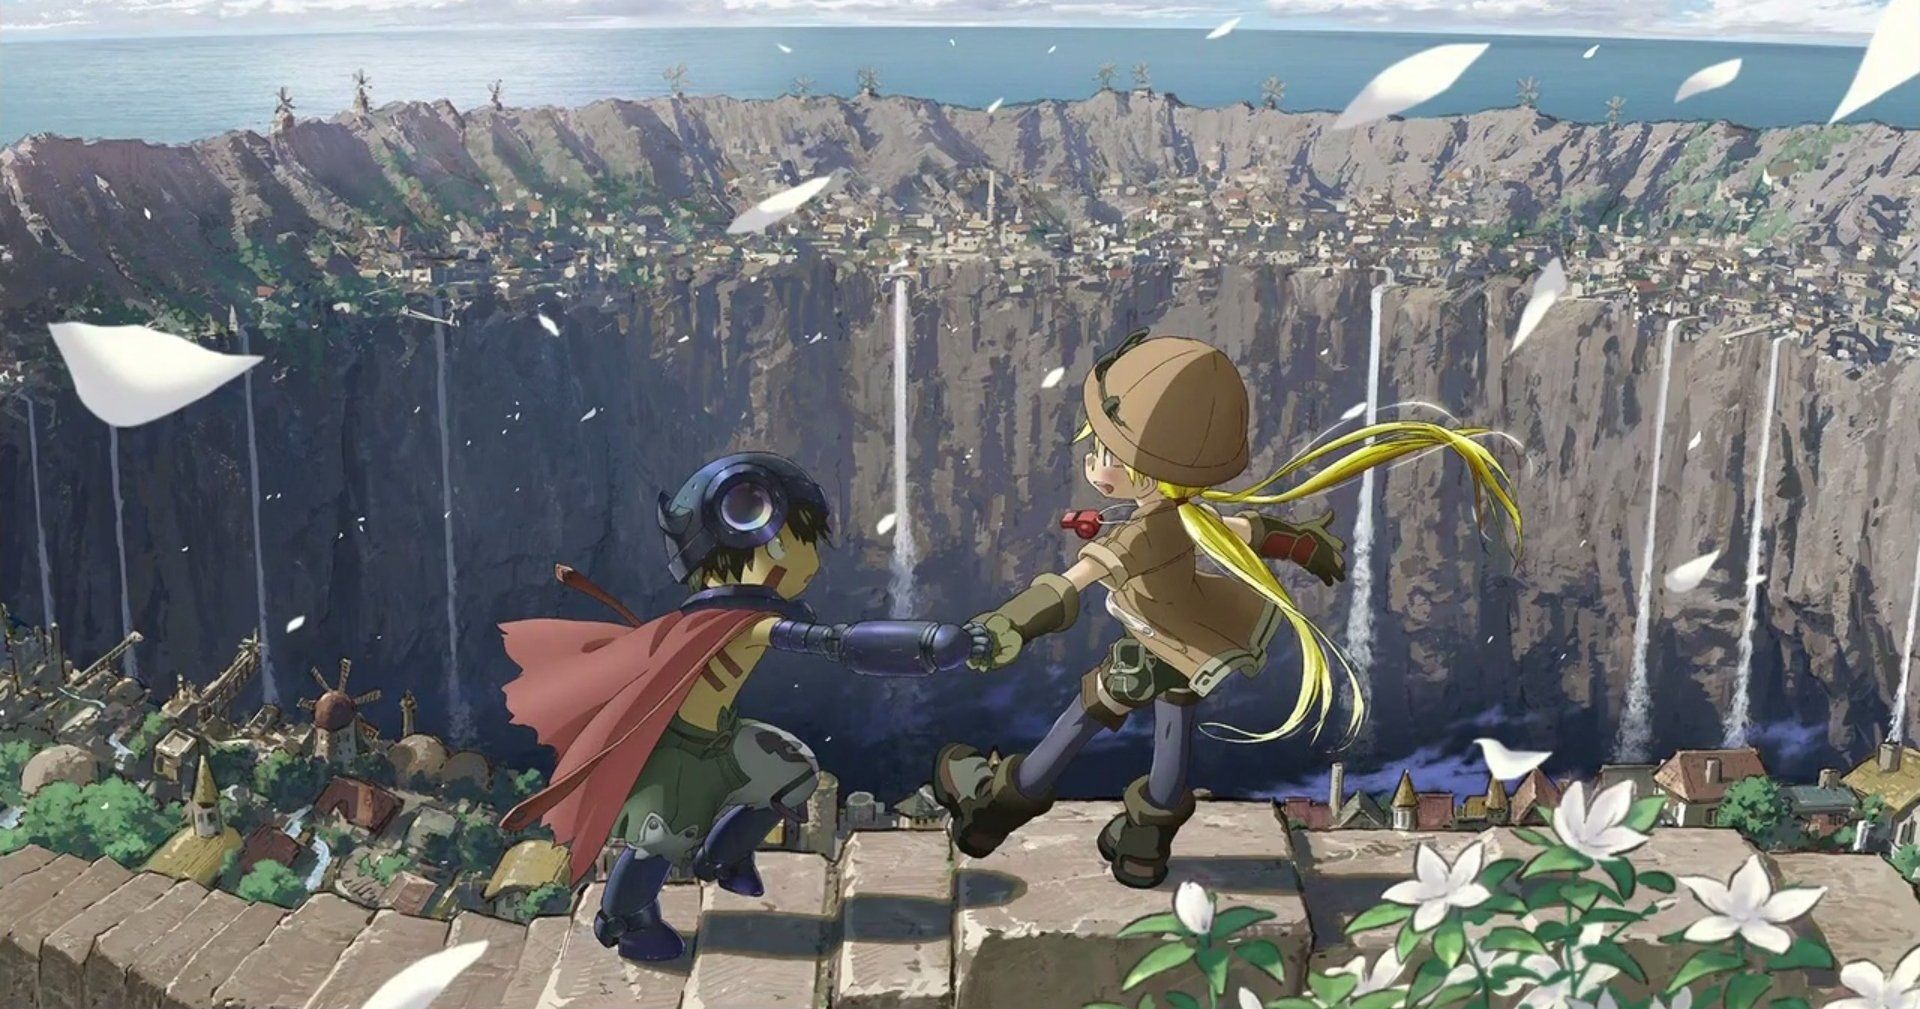 Made In Abyss Season 2 Releases New Trailer